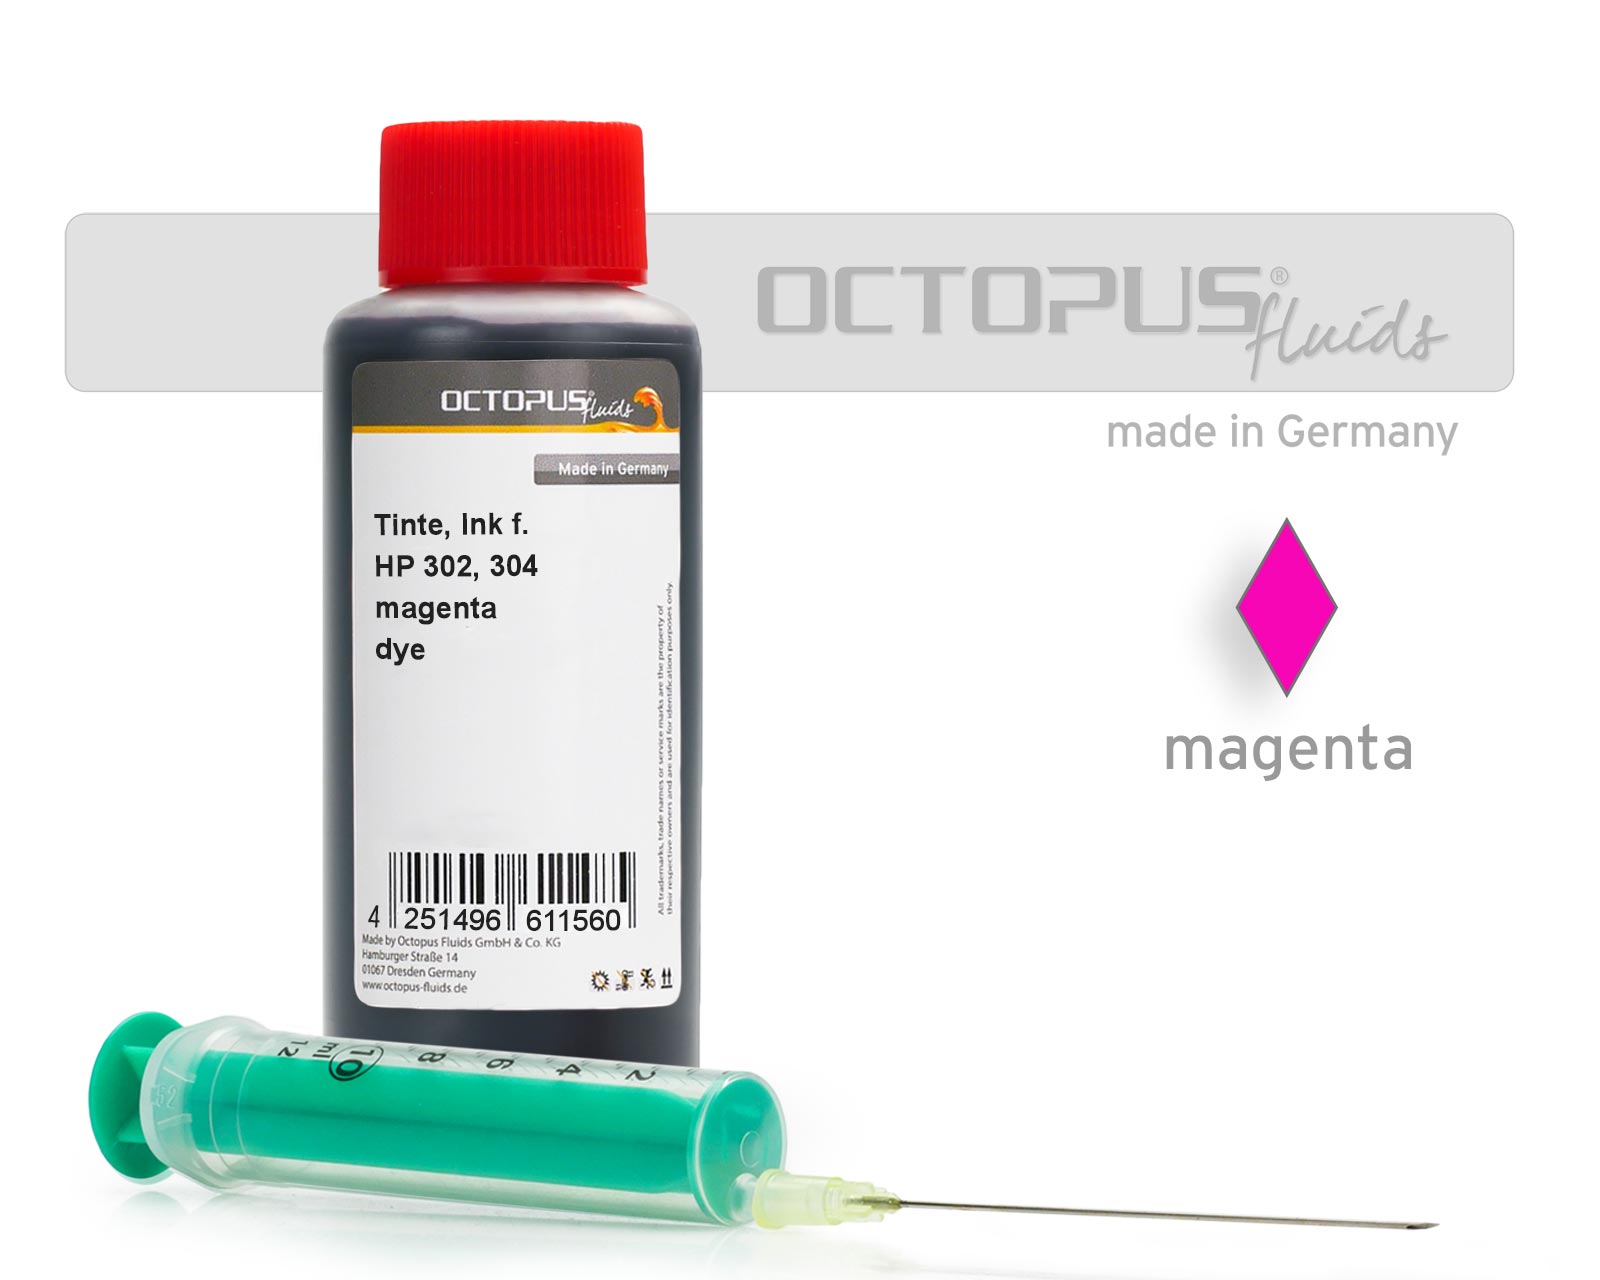 100ml Refill Ink for HP 302, HP 304 magenta with Syringe and gloves